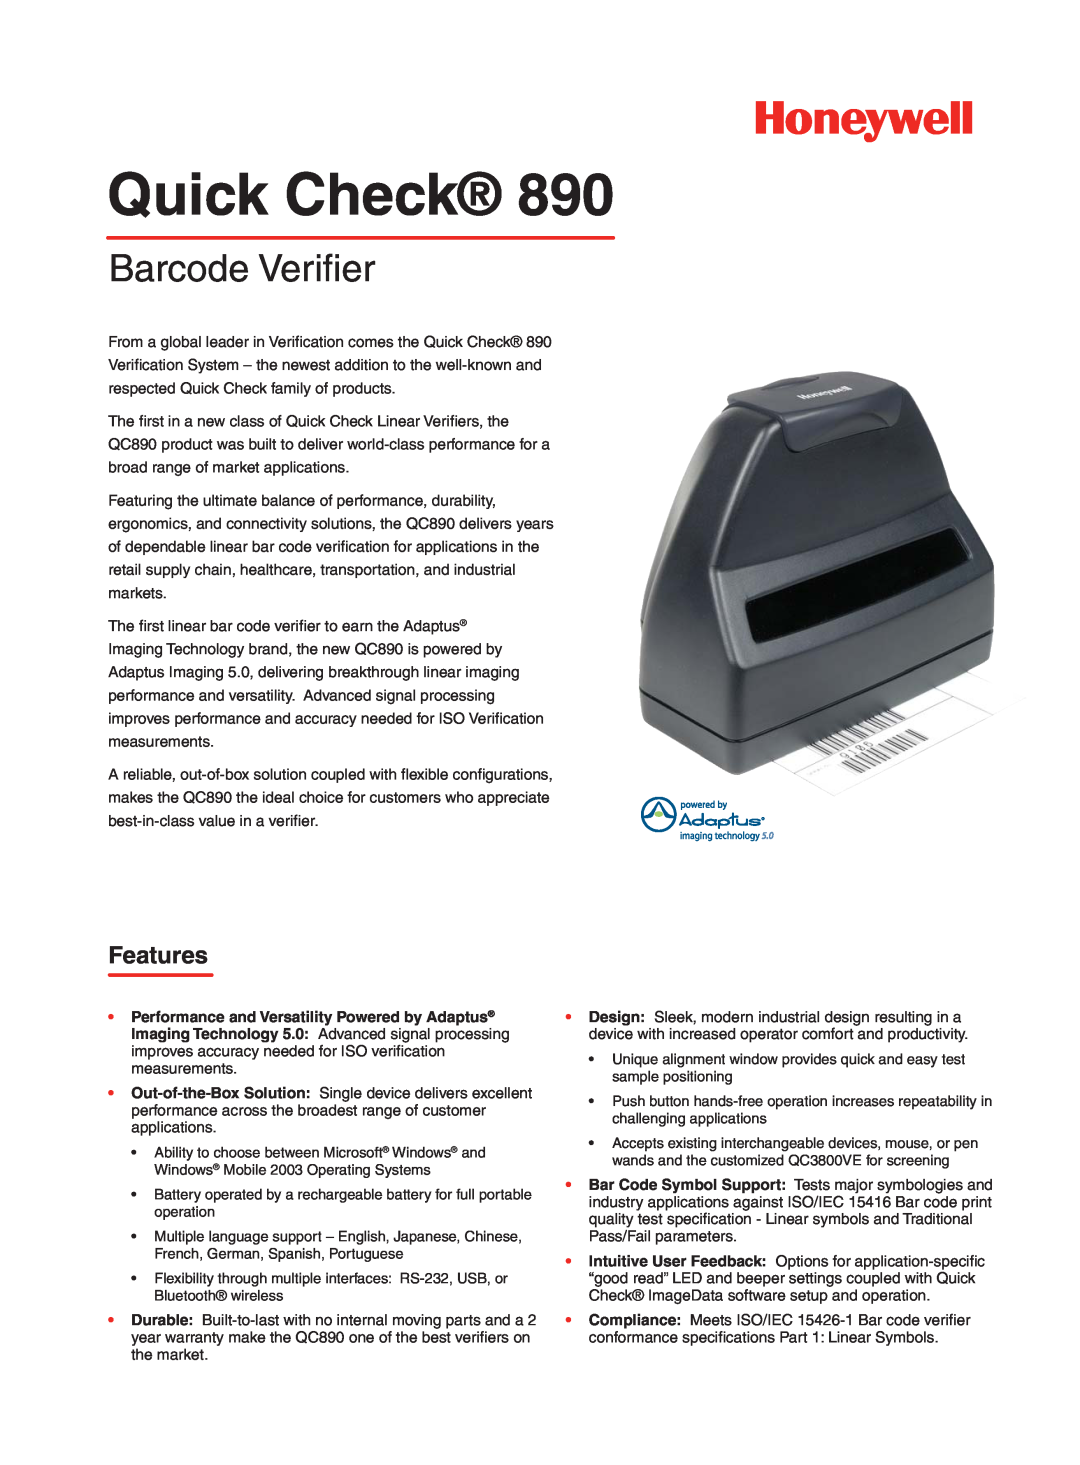 Honeywell Quick Check 890 warranty Performance and Versatility Powered by Adaptus, Barcode Veriﬁ er, Features 